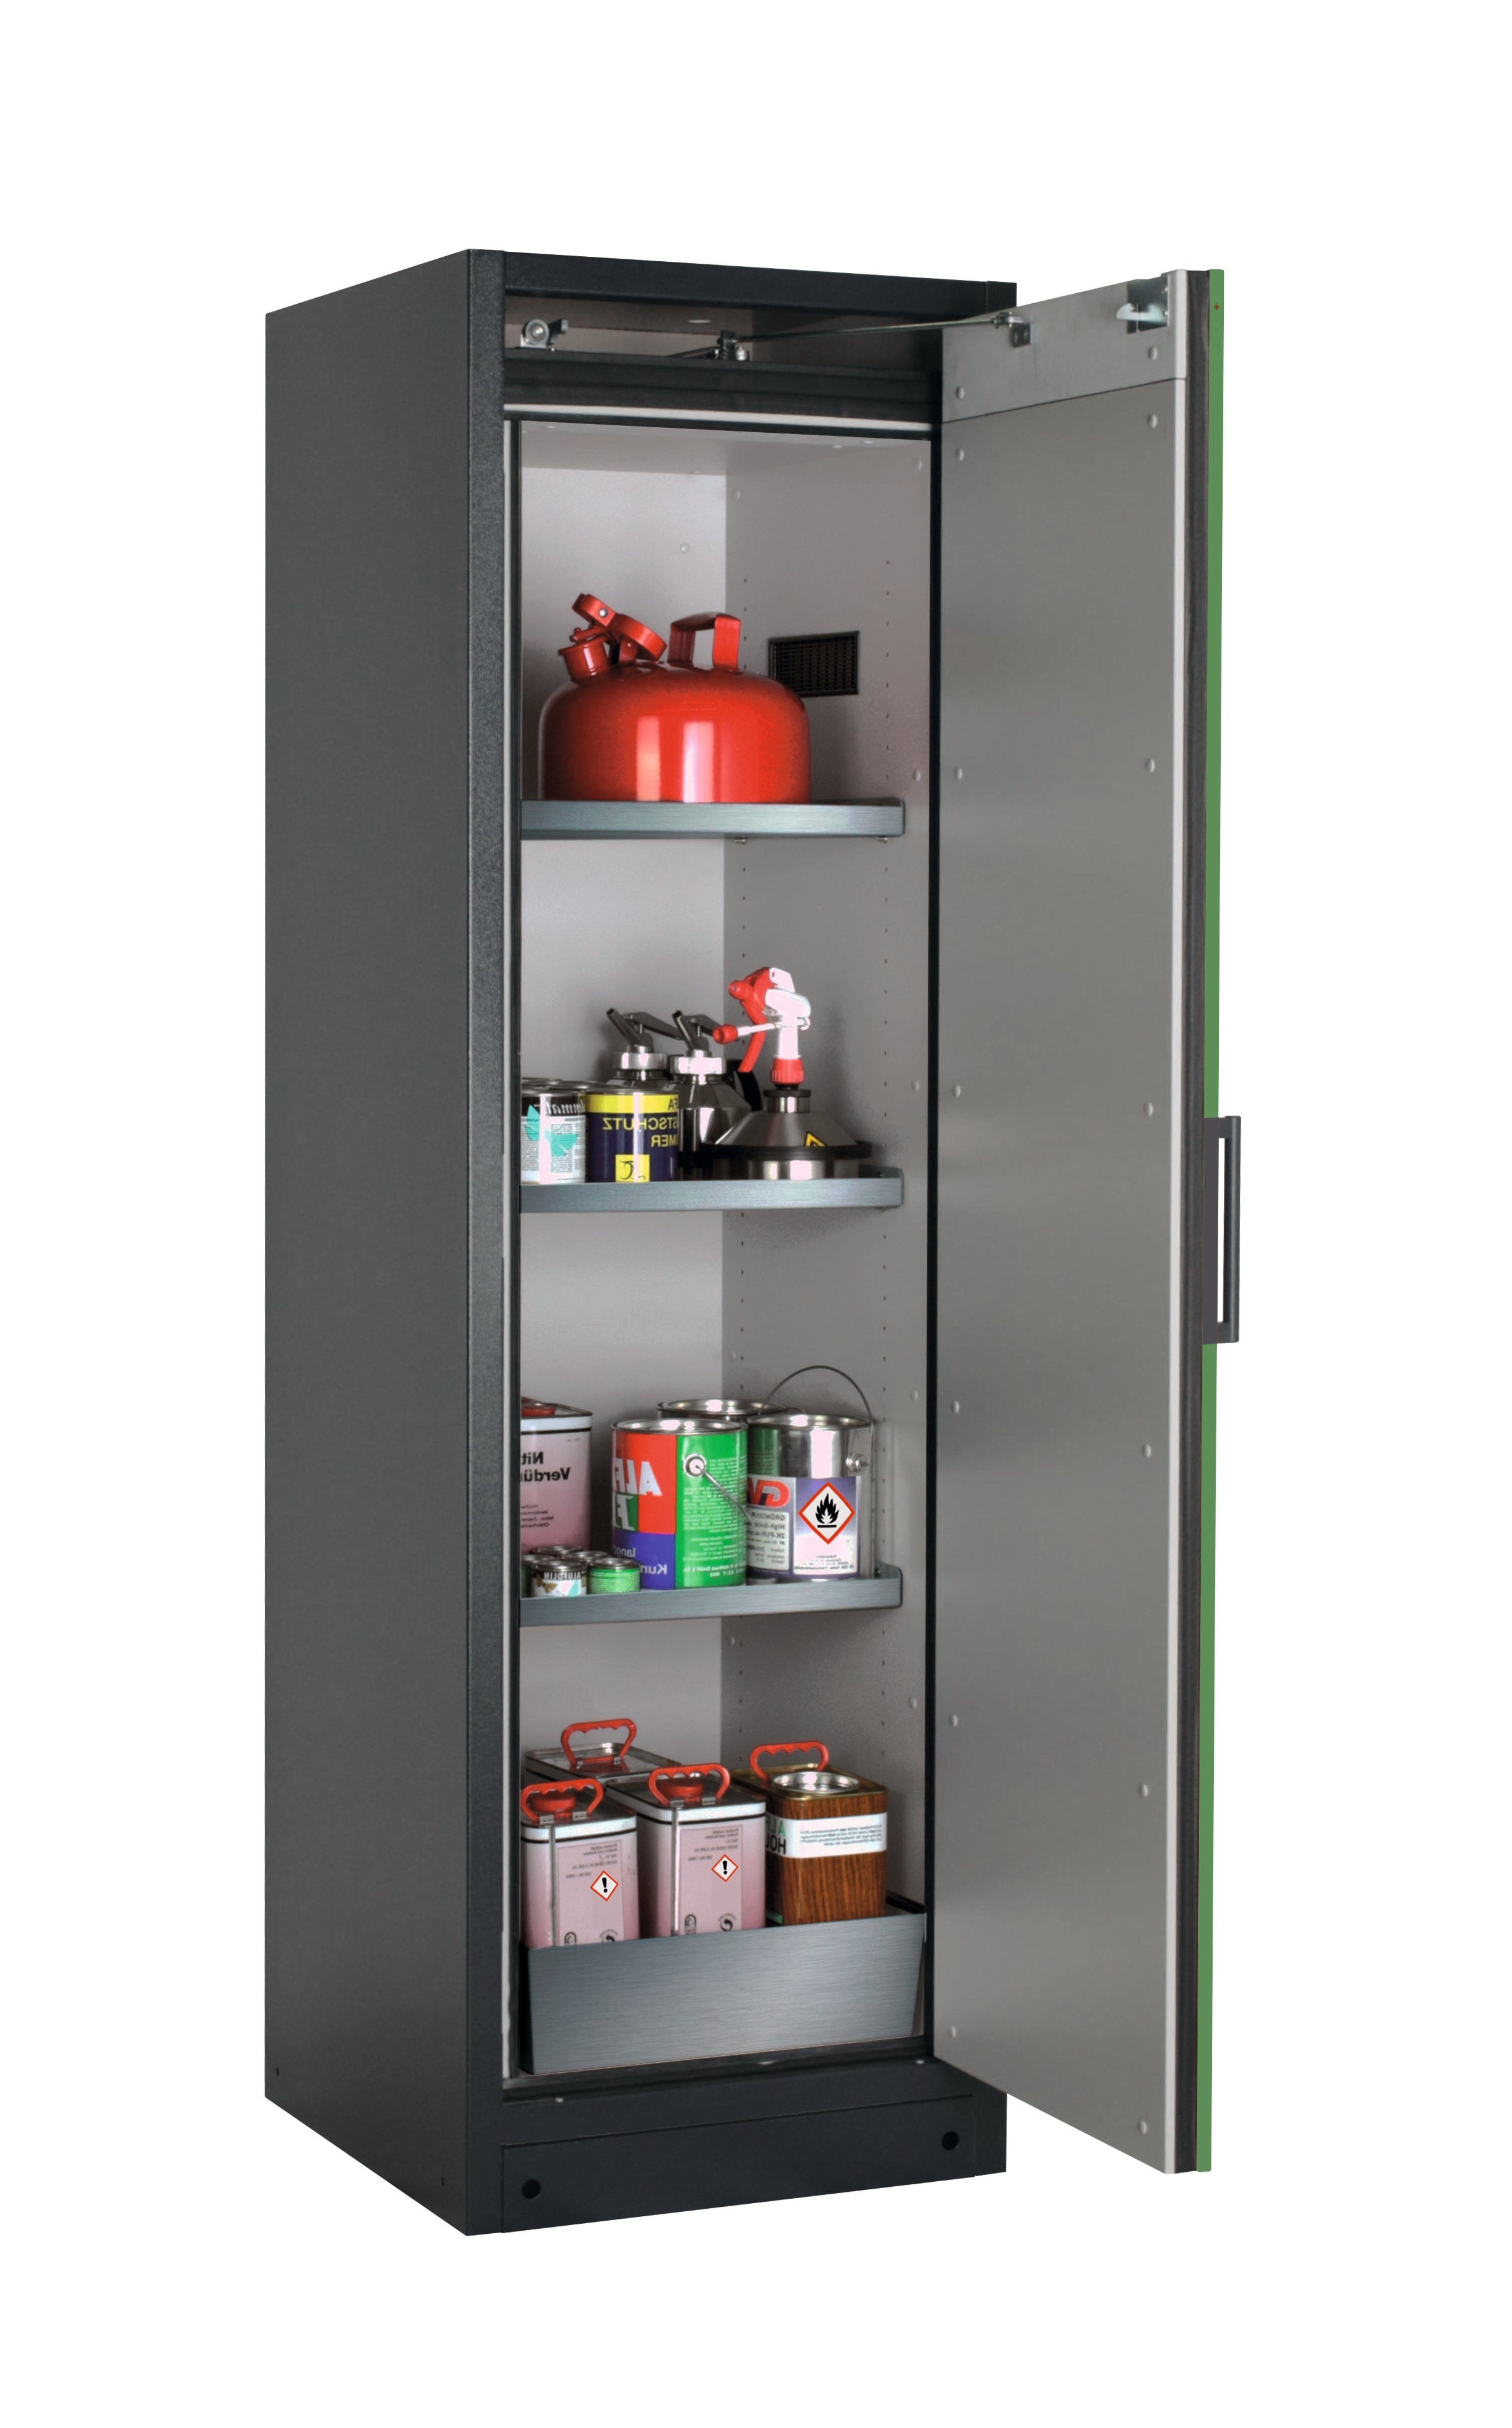 Type 90 safety storage cabinet Q-CLASSIC-90 model Q90.195.060.R in reseda green RAL 6011 with 3x shelf standard (stainless steel 1.4301),